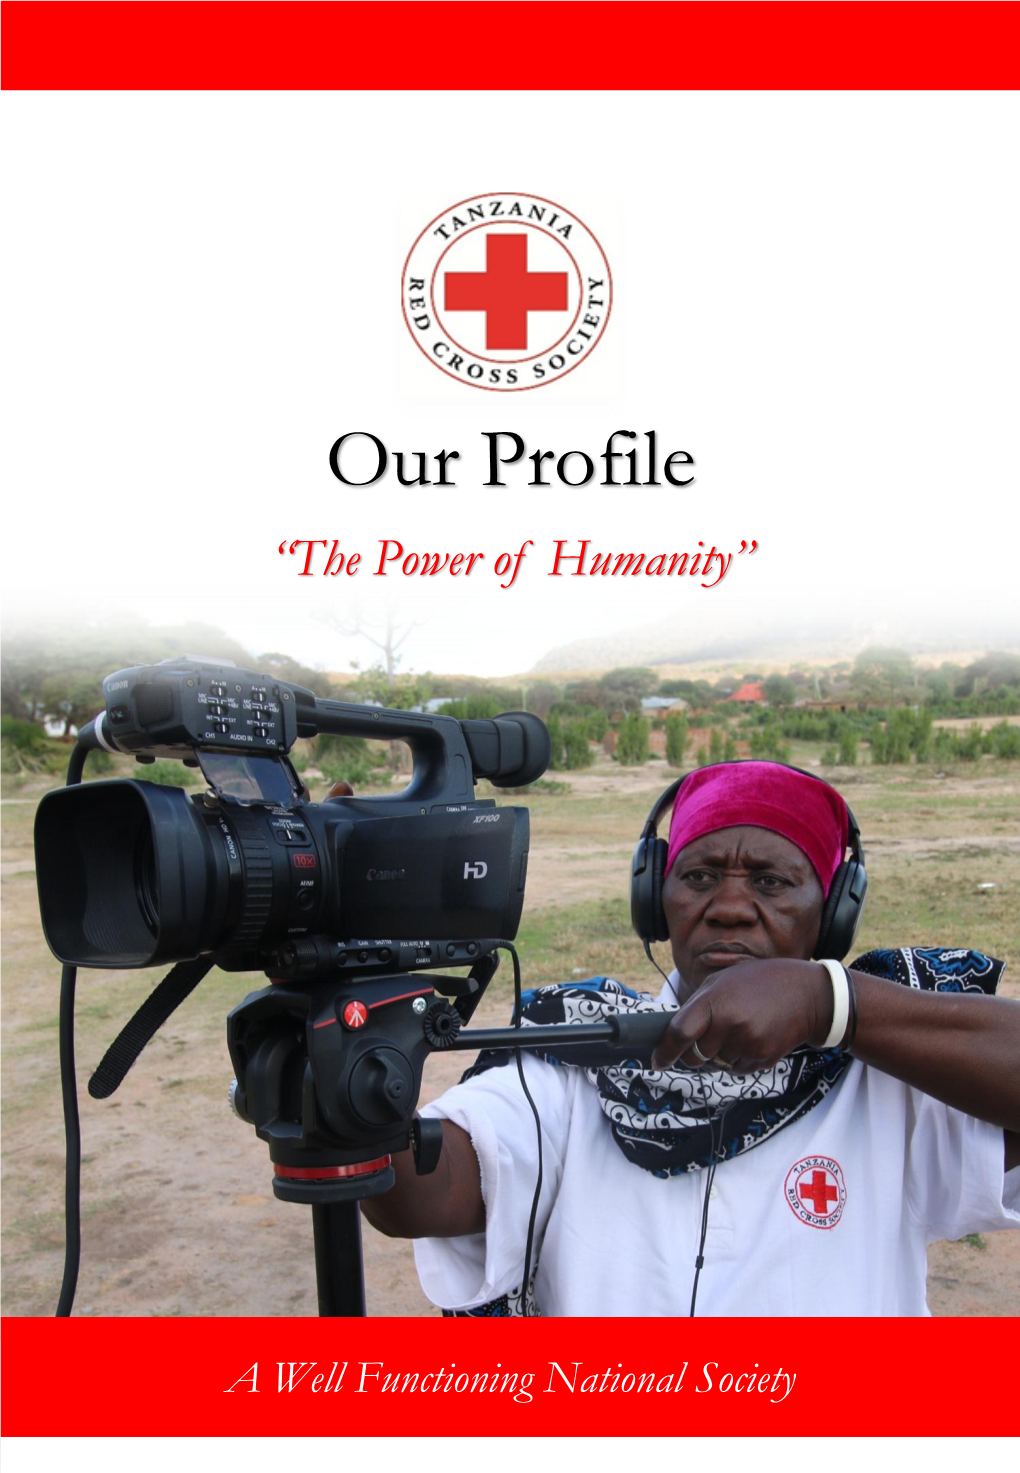 Our Profile “The Power of Humanity”